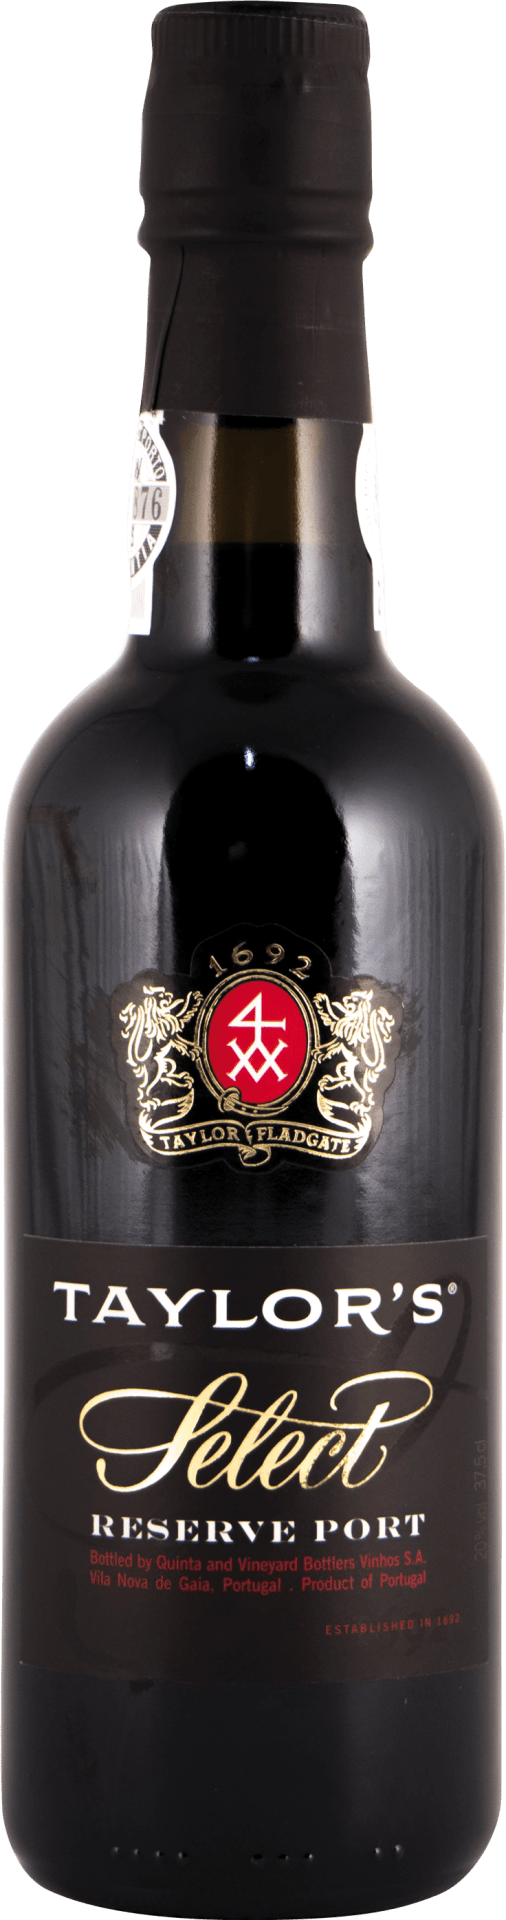 Ruby Select halbe Flasche